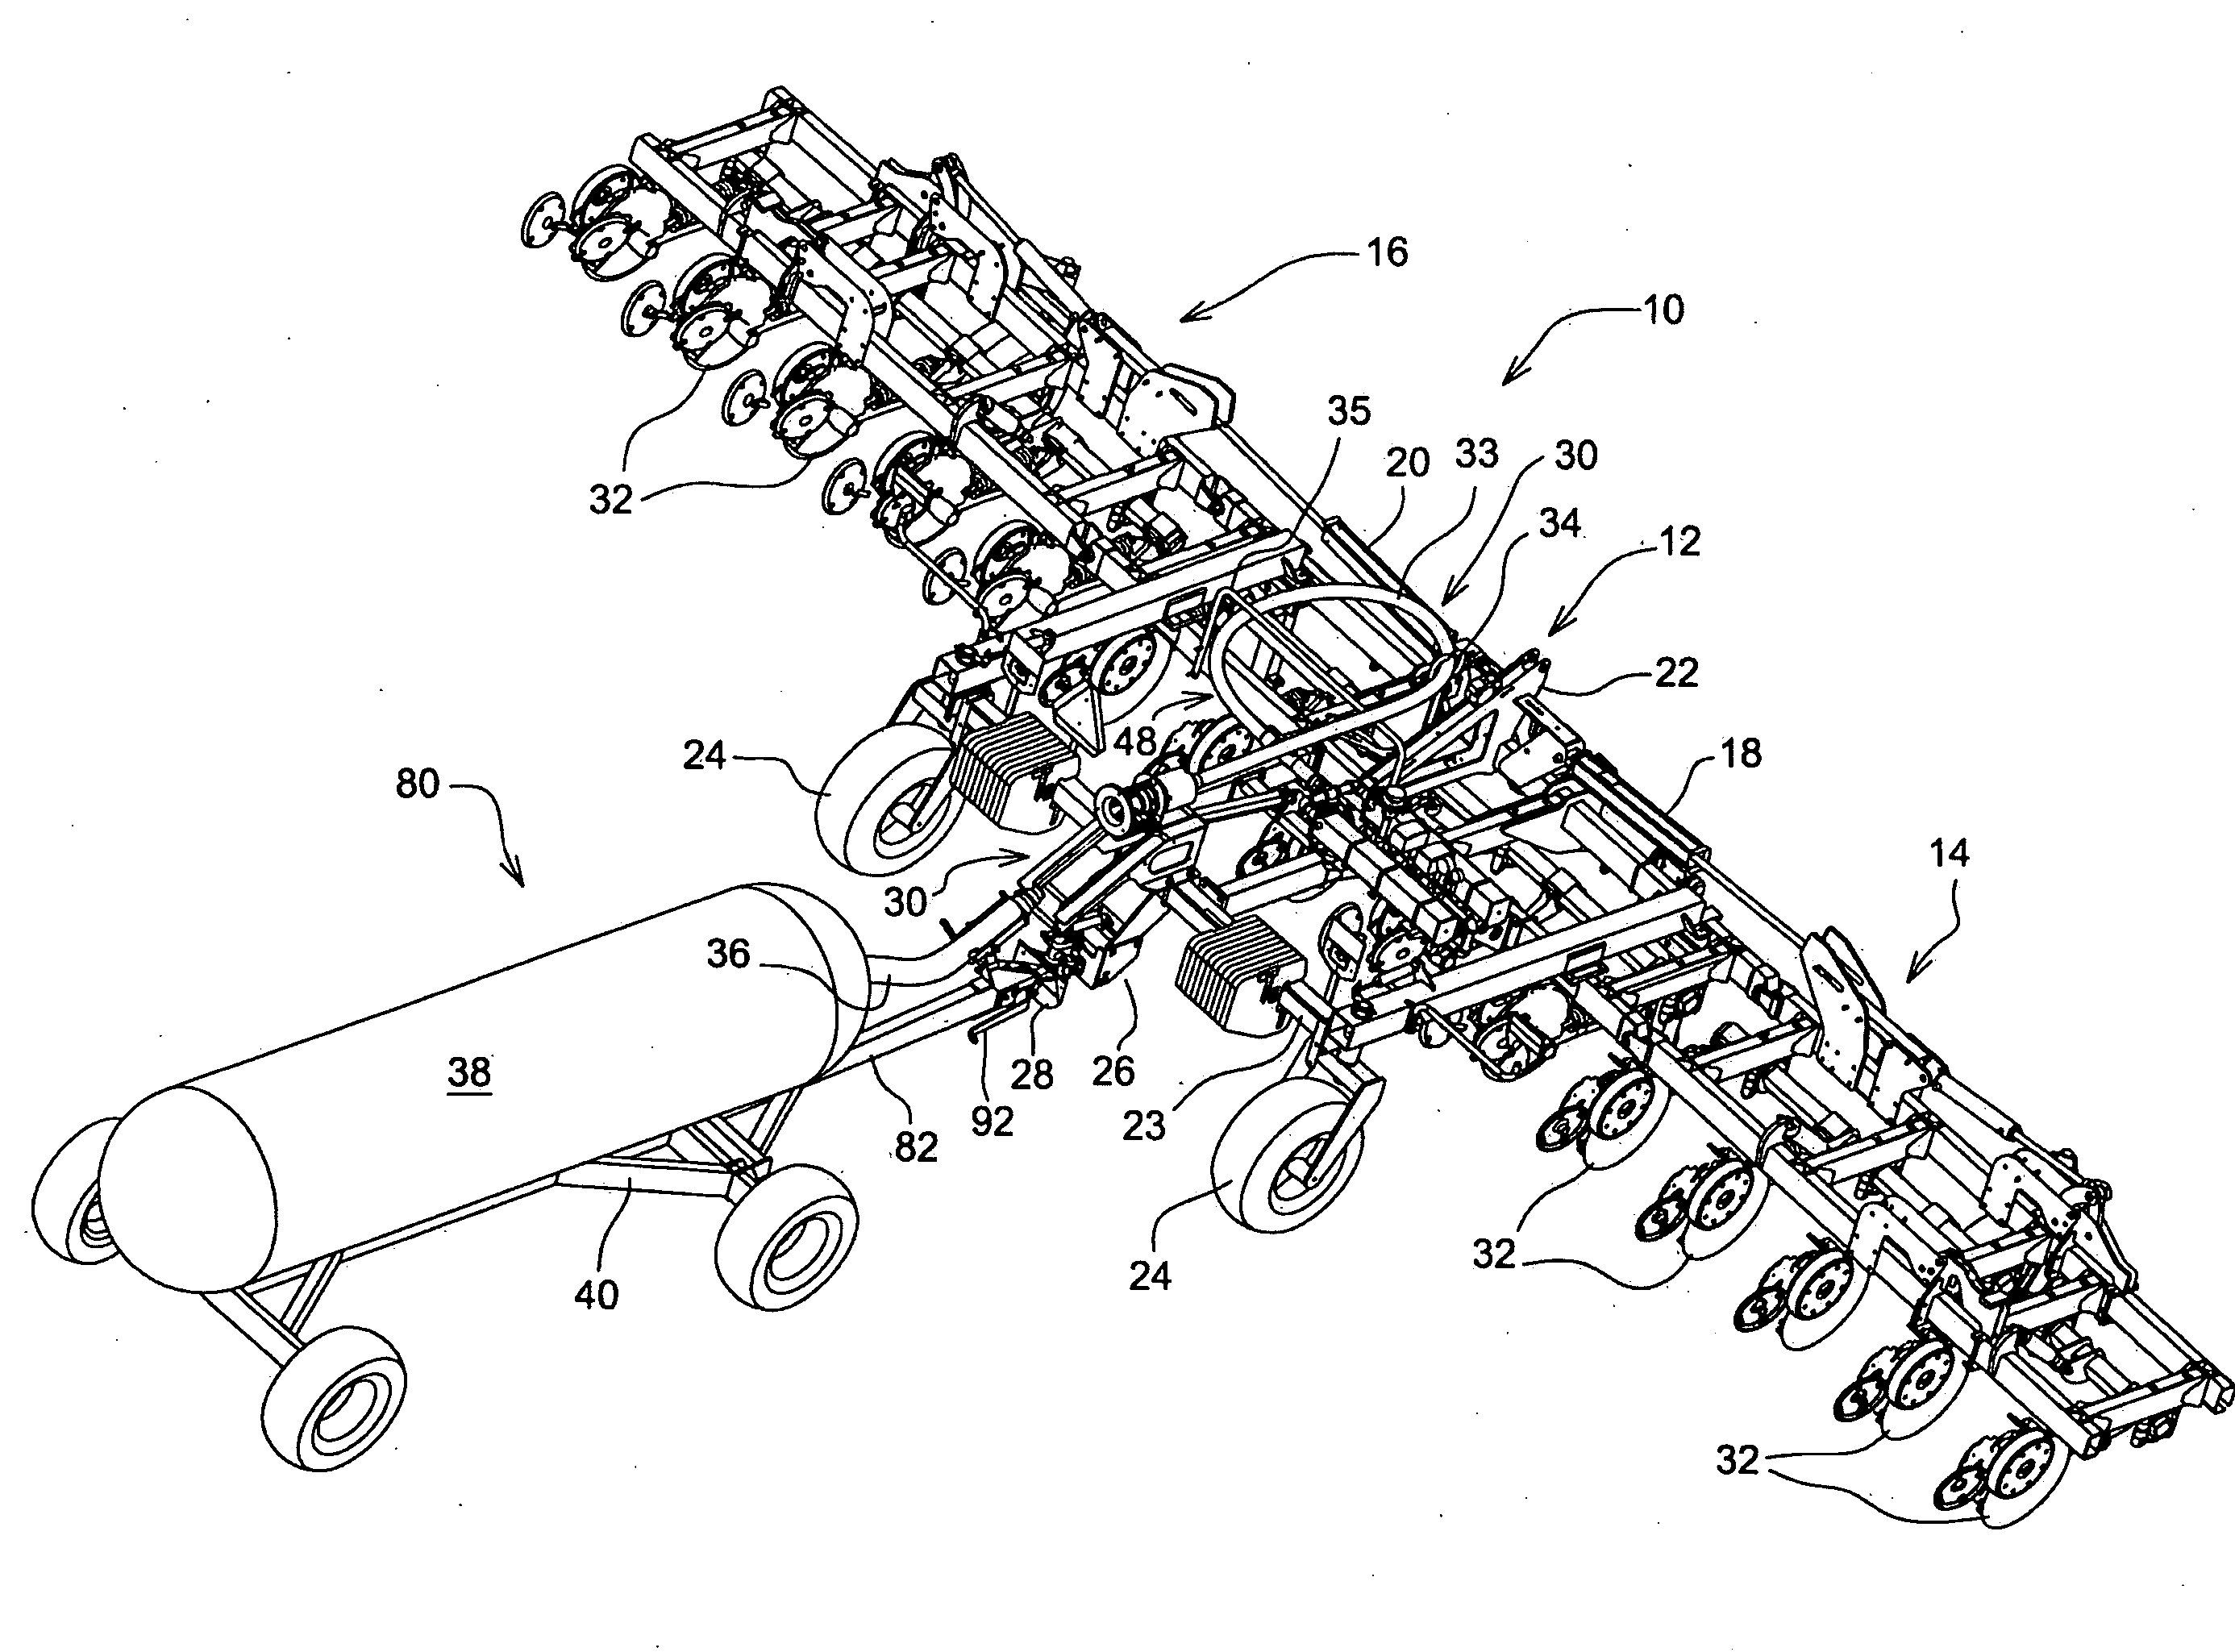 Hitch and coupling arrangement for automatically effecting towing hitch and fluid quick-coupler connections between a nurse tank wagon and an nh3 applicator implement